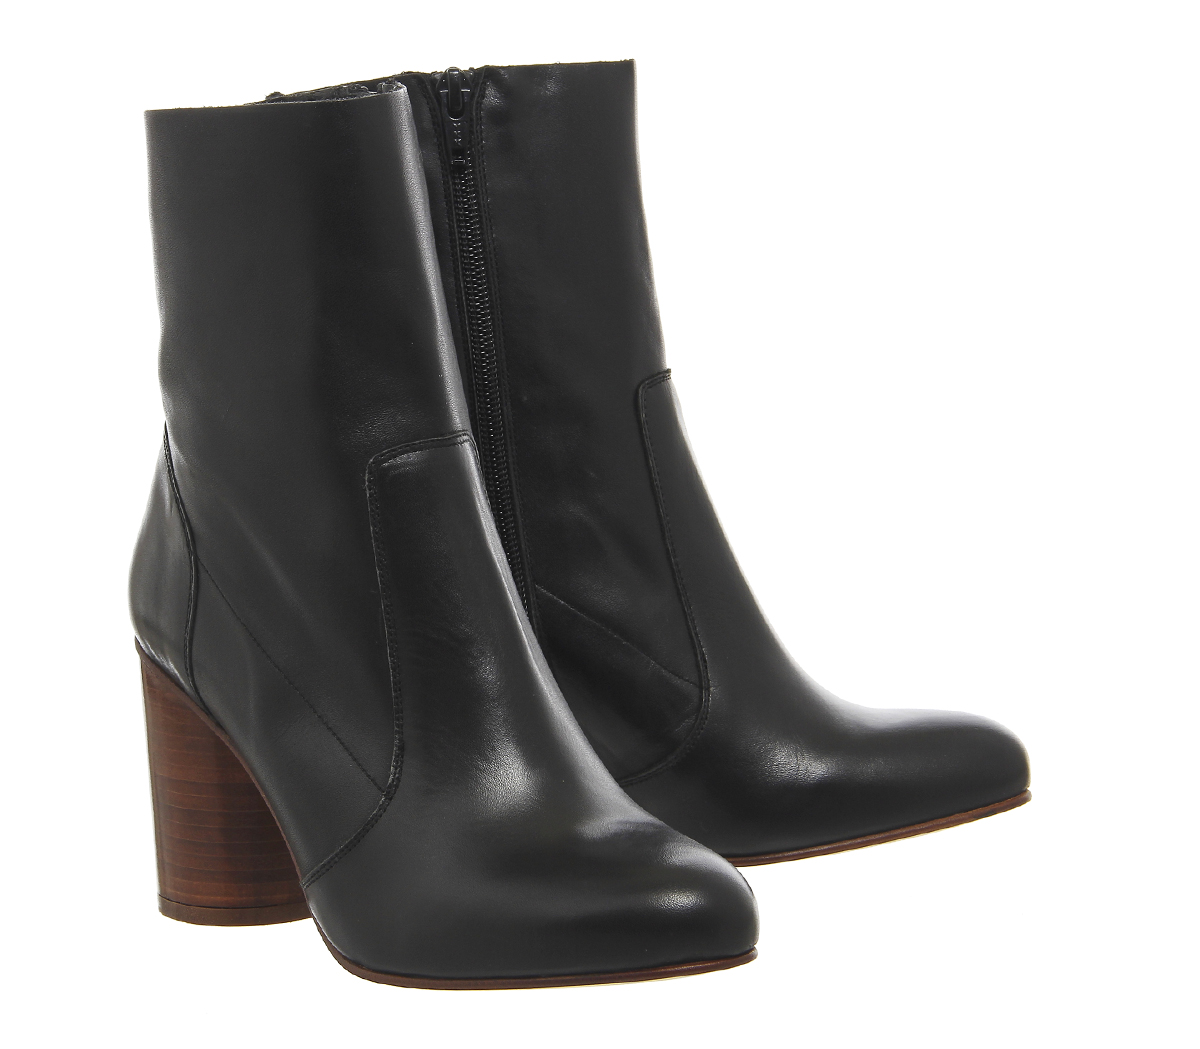 OFFICE Ida Cylindrical Heel Boots Black Leather - Women's Ankle Boots